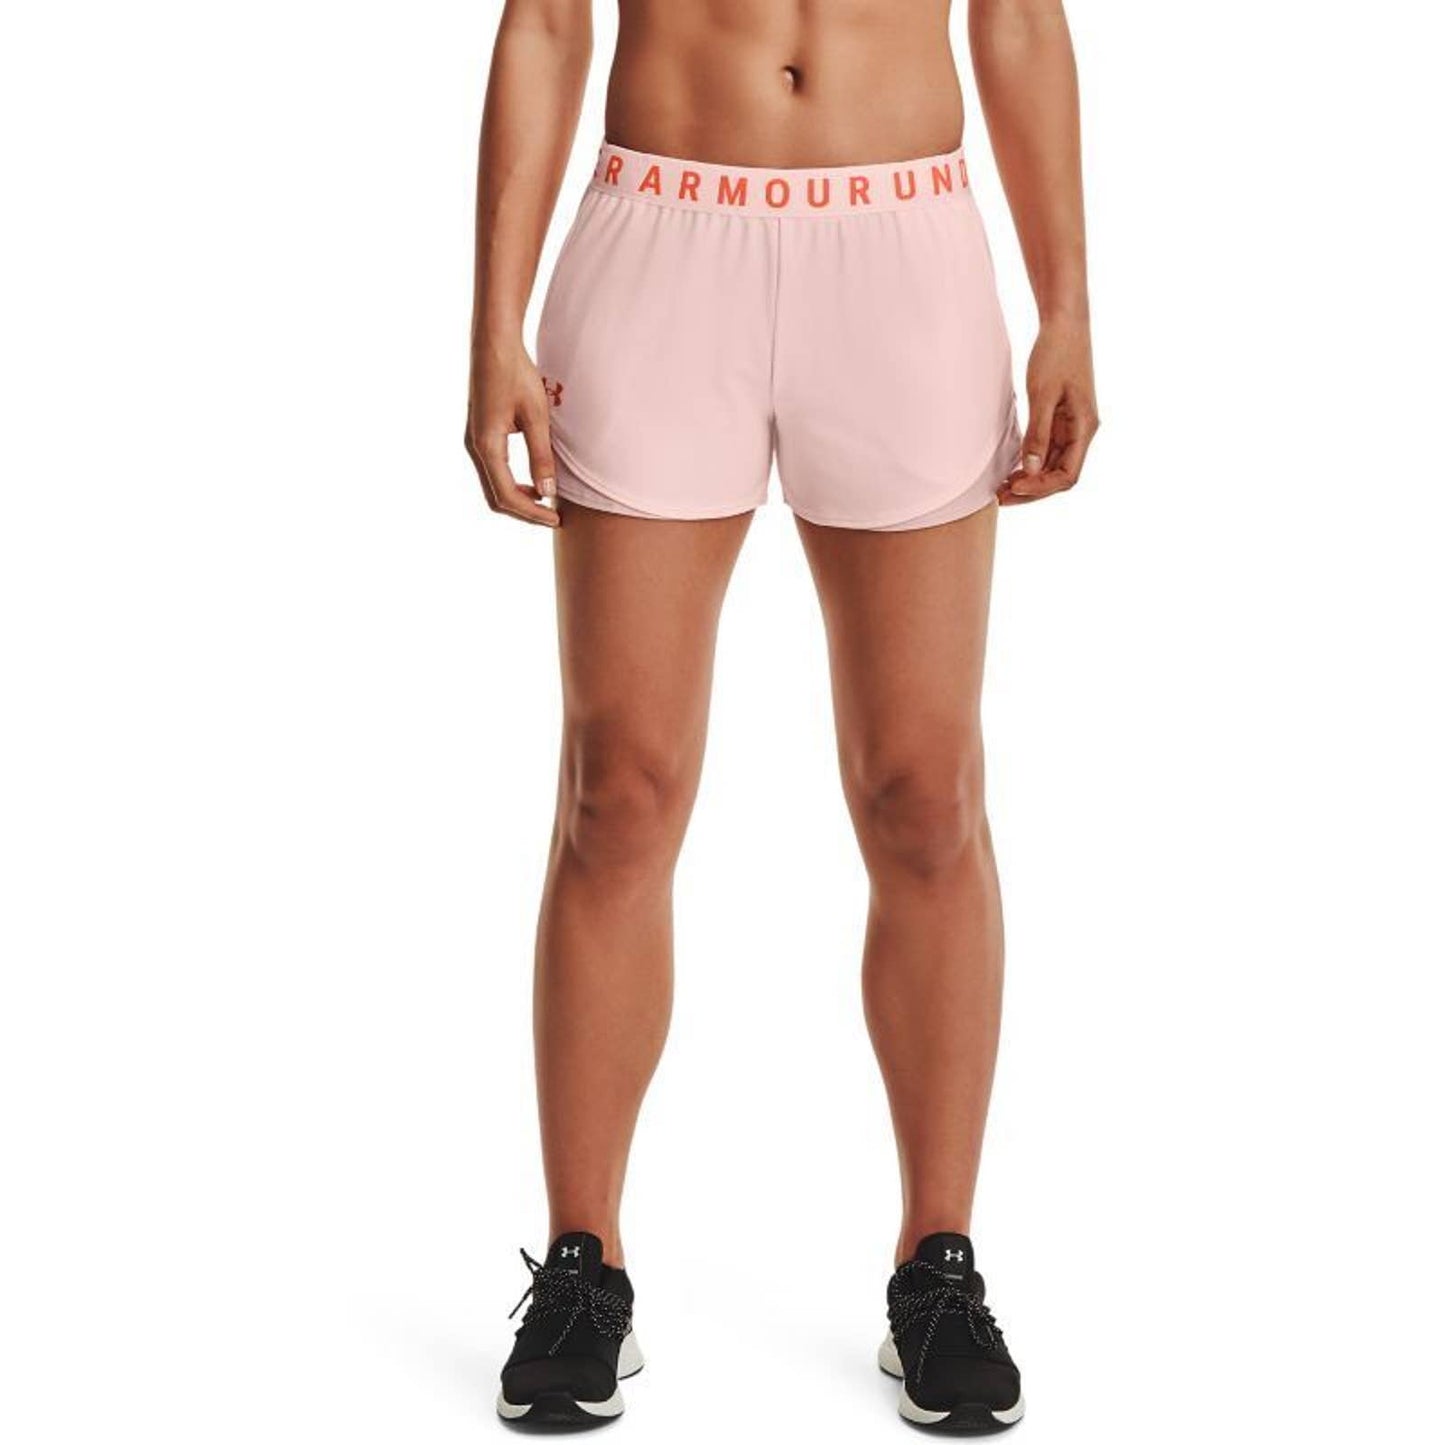 Under Armour Women's Play Up Shorts Beta Tint Particle Pink, NWT